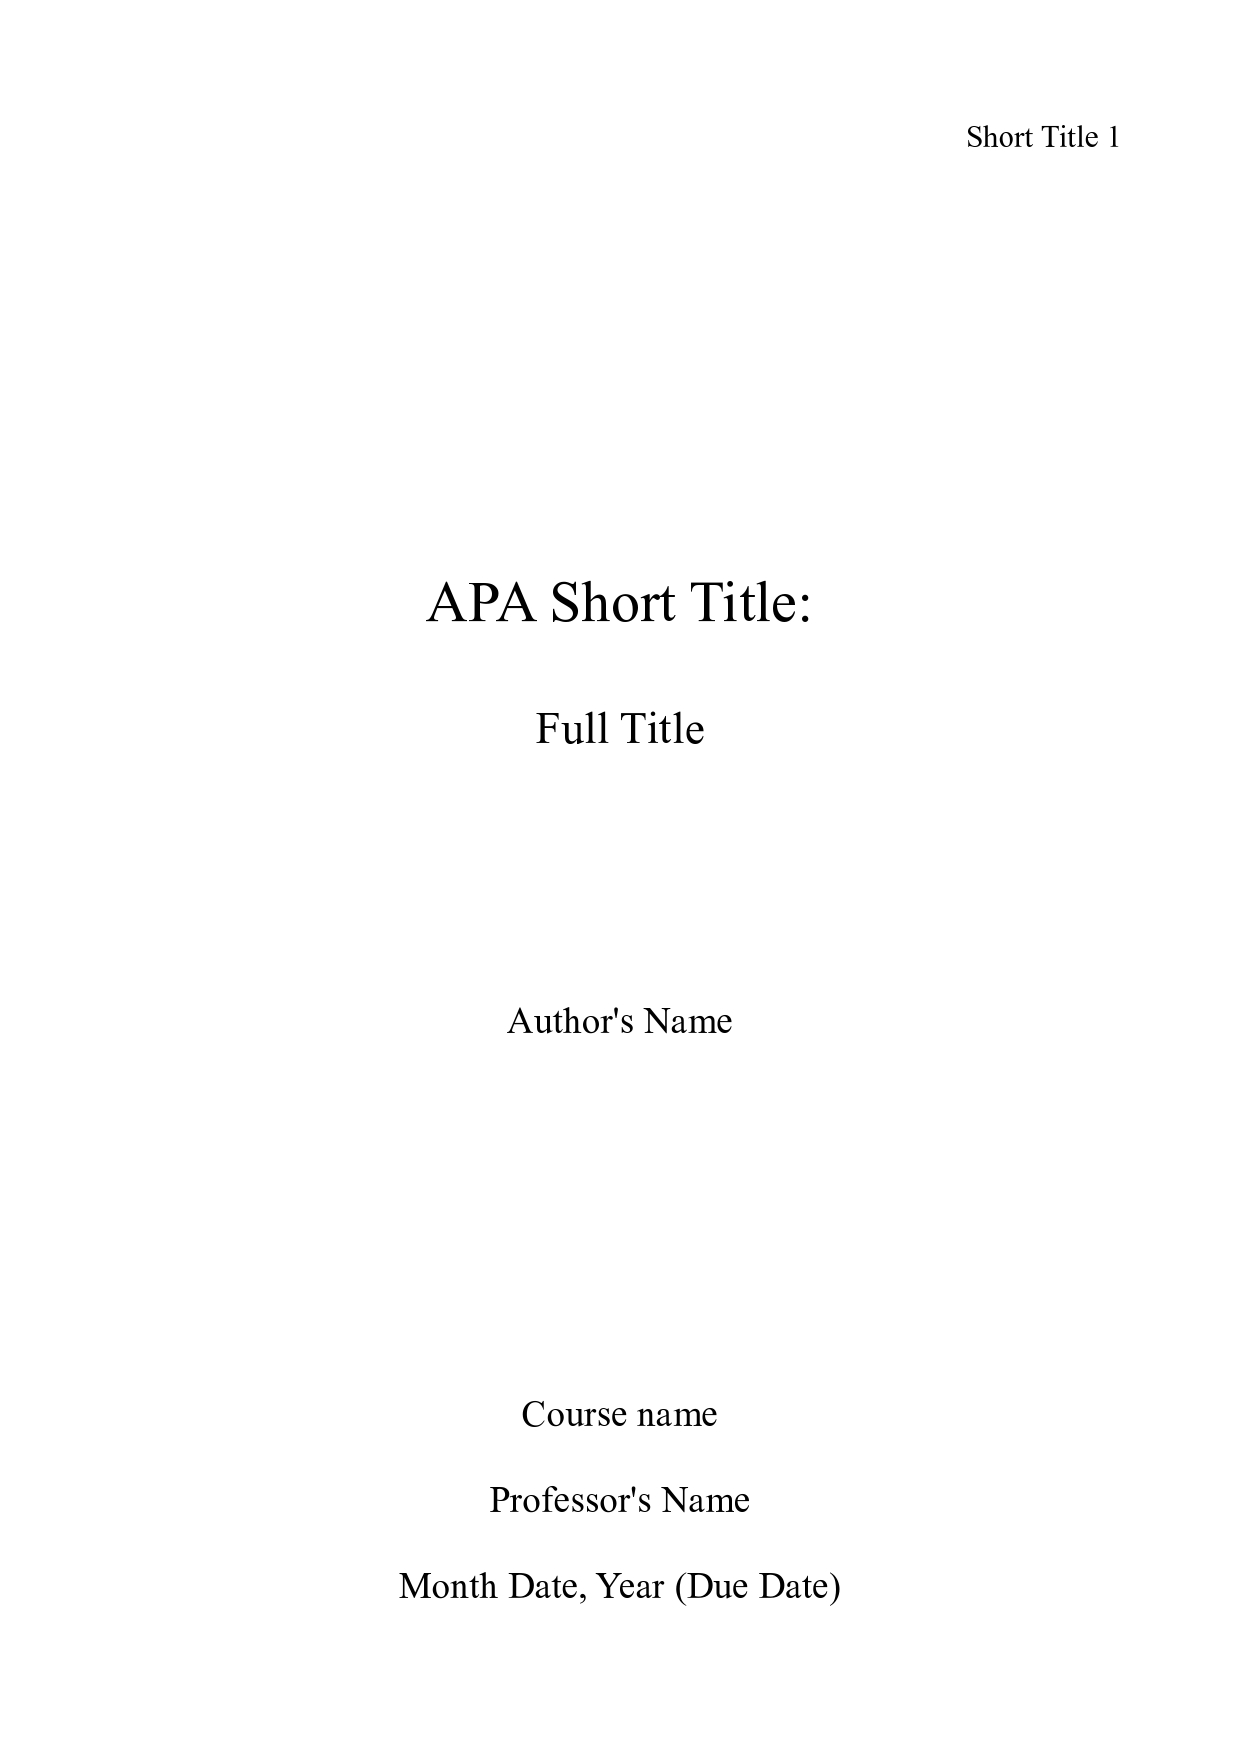 Dissertation Proposal Cover Sheet APA Title Page